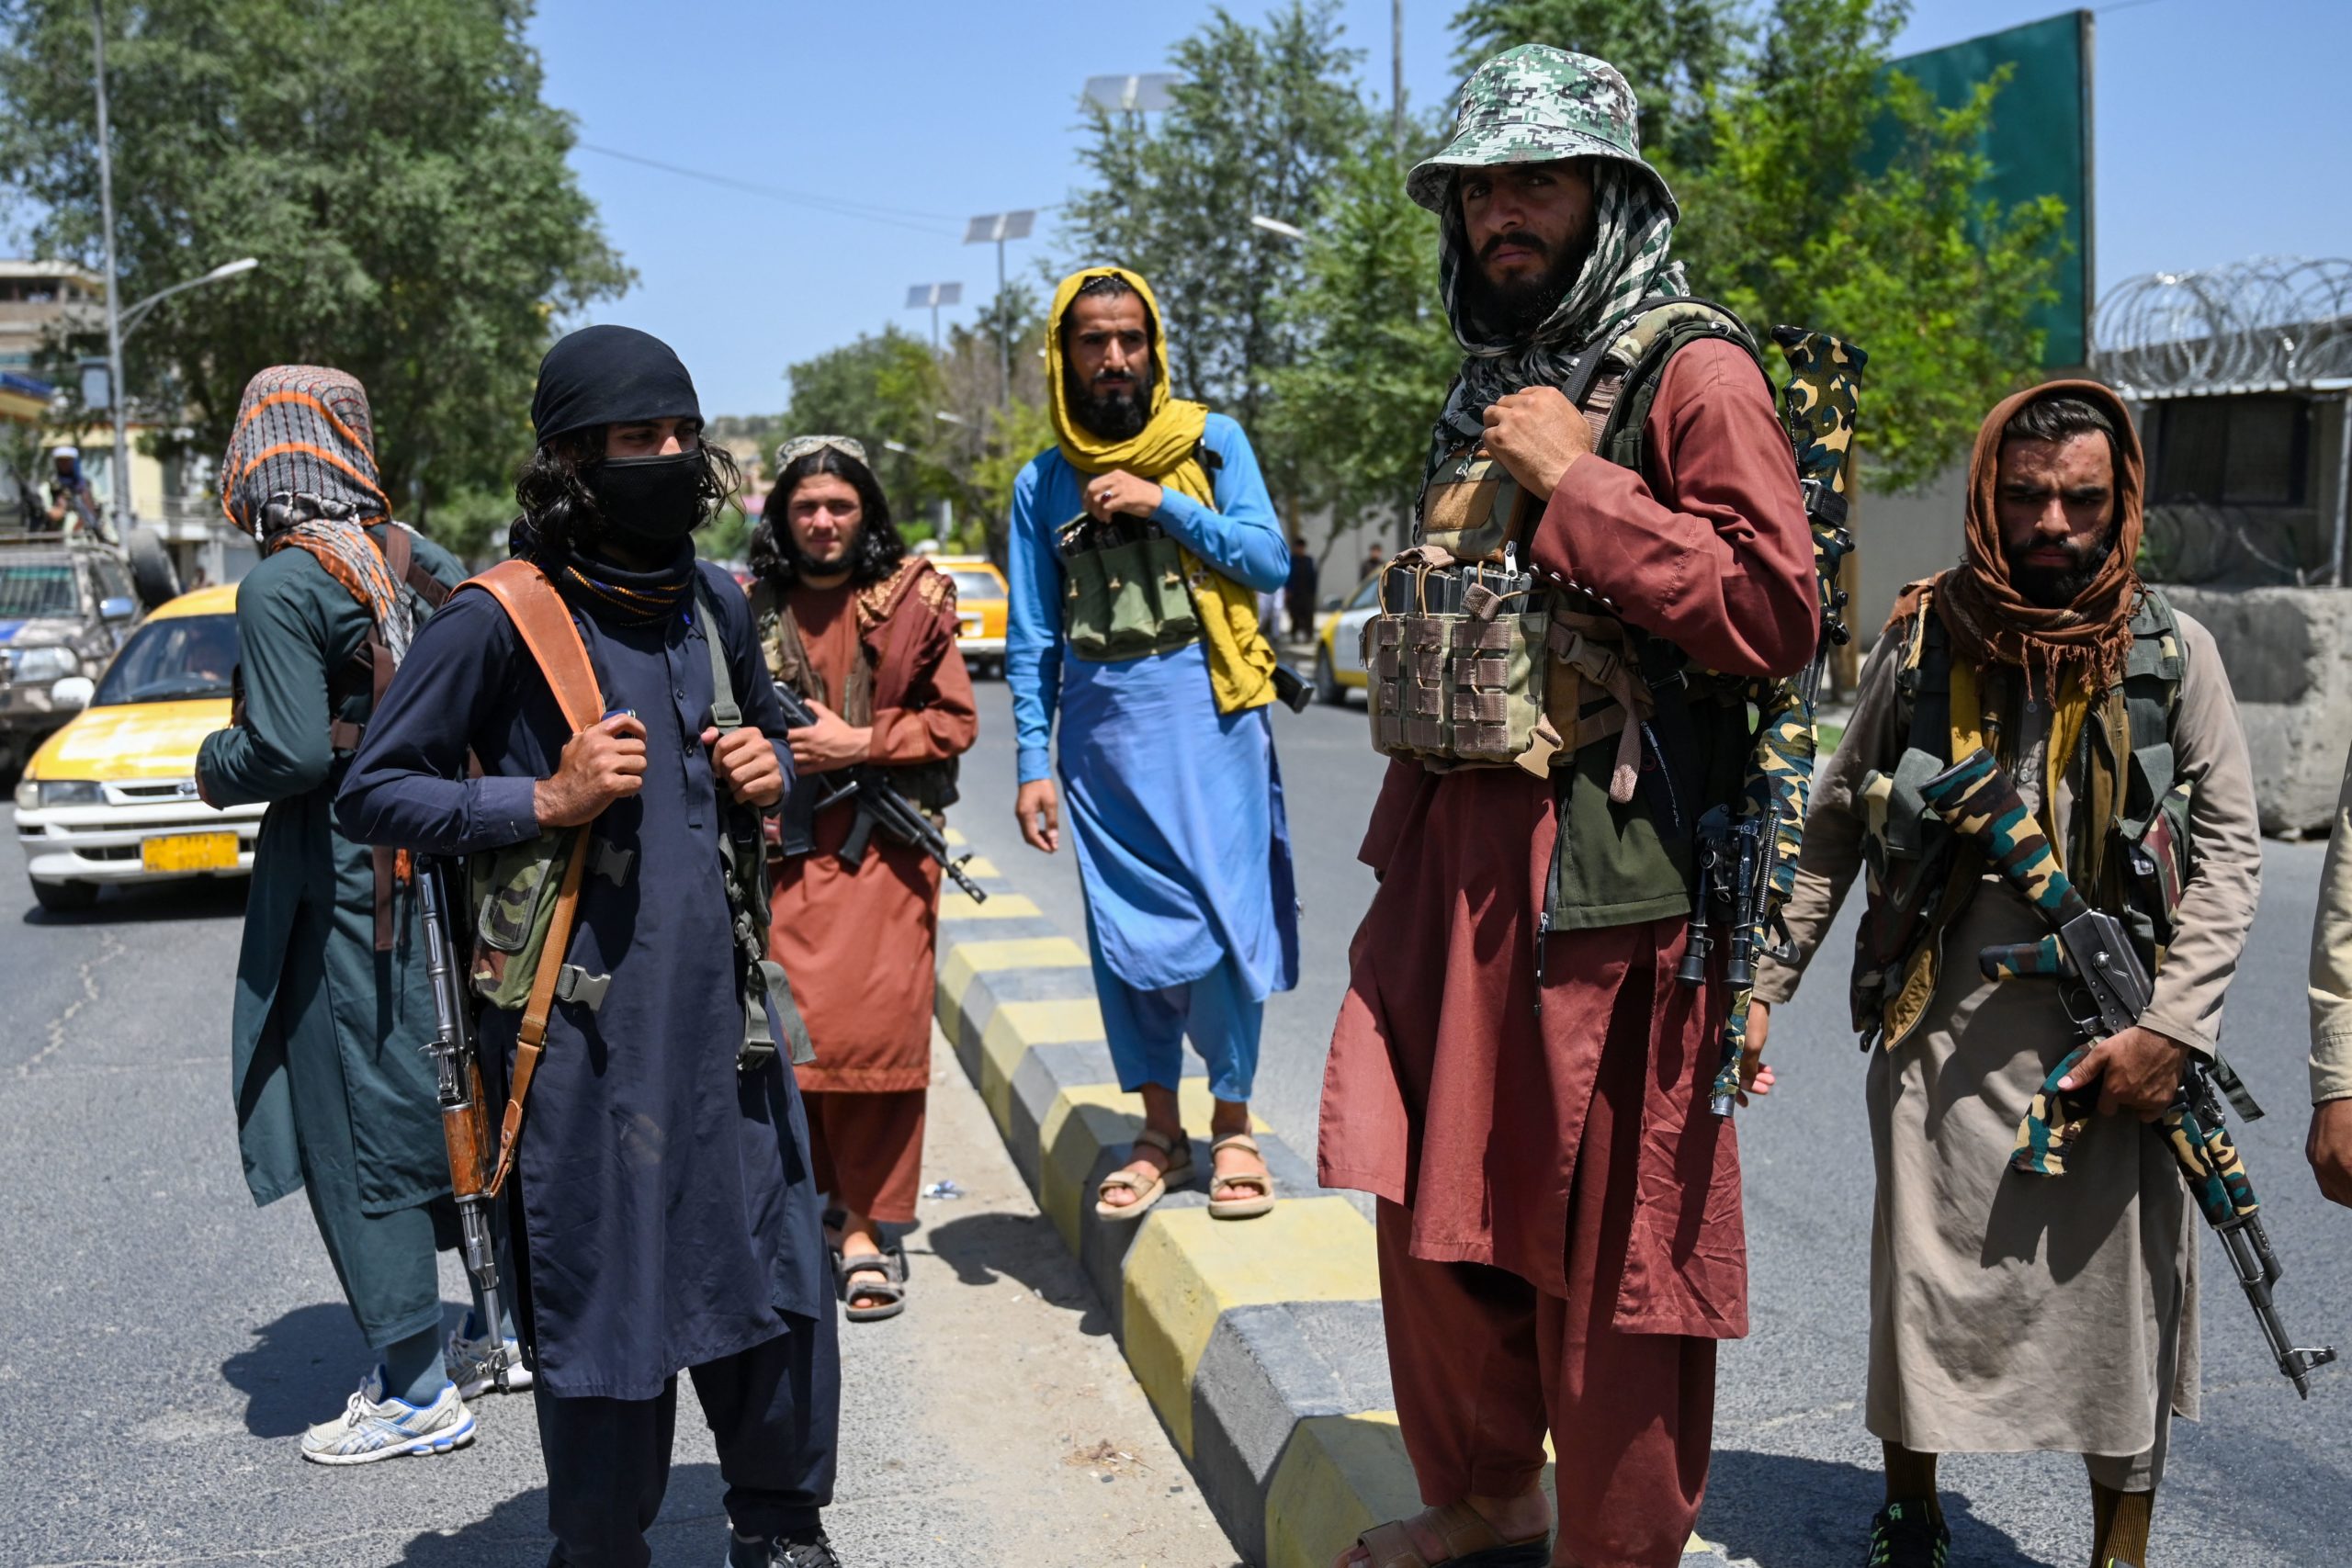 Taliban fighters stand guard along a street in Kabul on Aug. 16. (WAKIL KOHSAR/AFP via Getty Images)